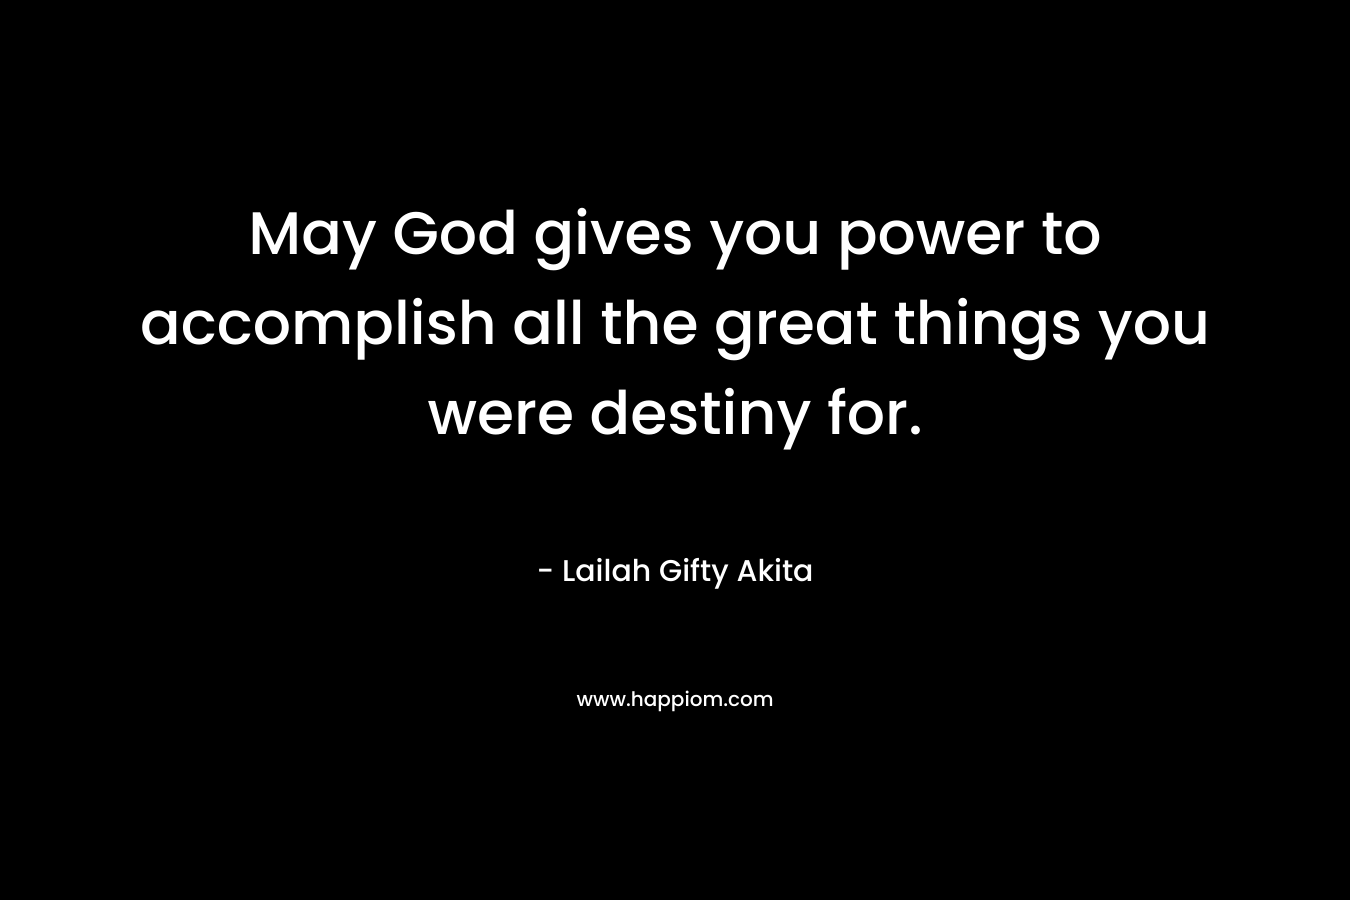 May God gives you power to accomplish all the great things you were destiny for.